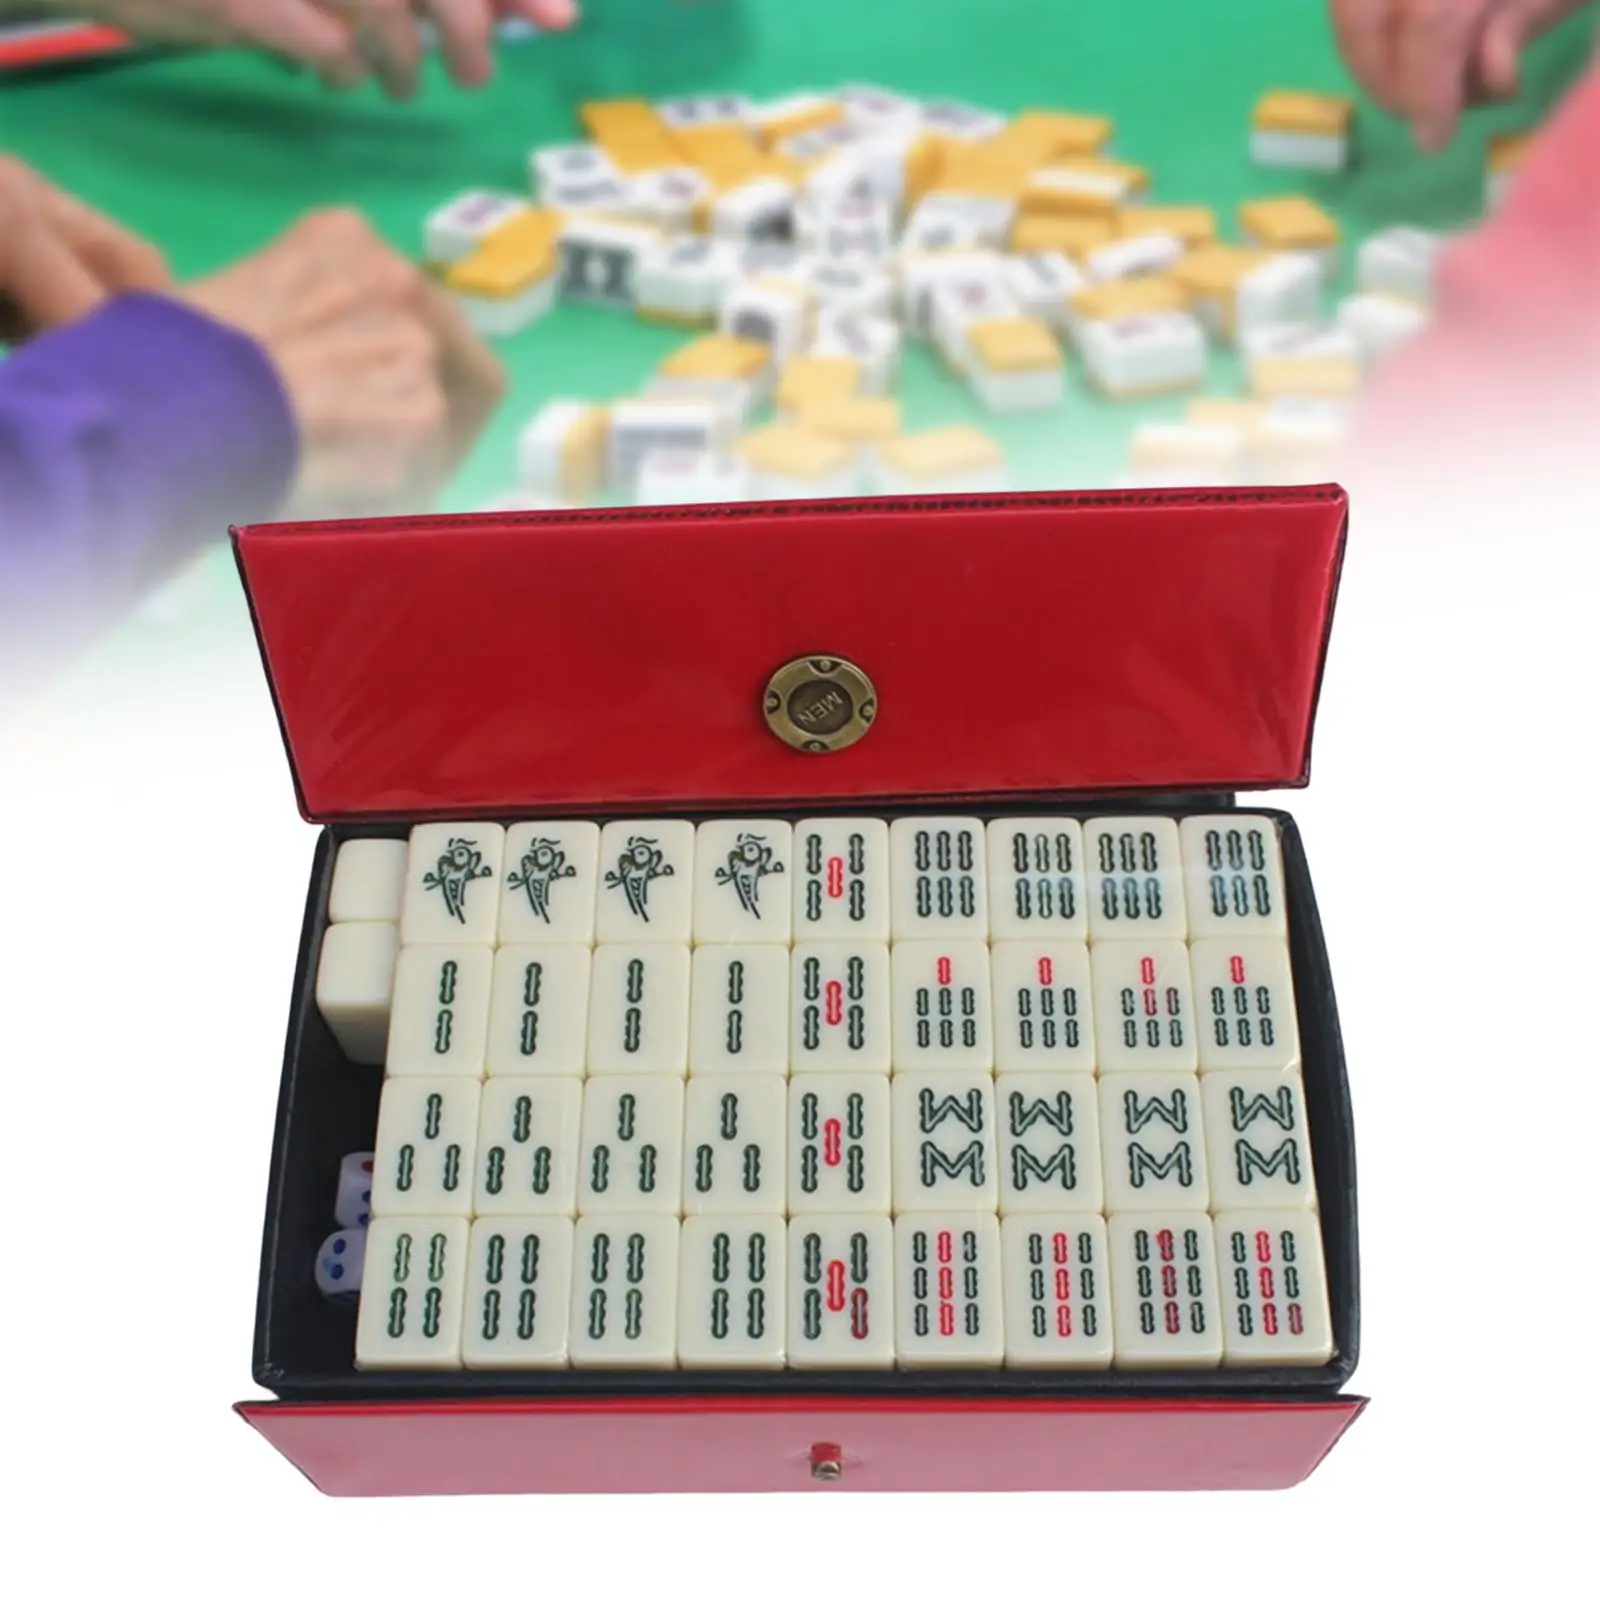 

Portable Complete Mahjong Game Set Board Game with Carrying Travel Case Majiang Activity Game and 2 Blank Tiles for Home Travel